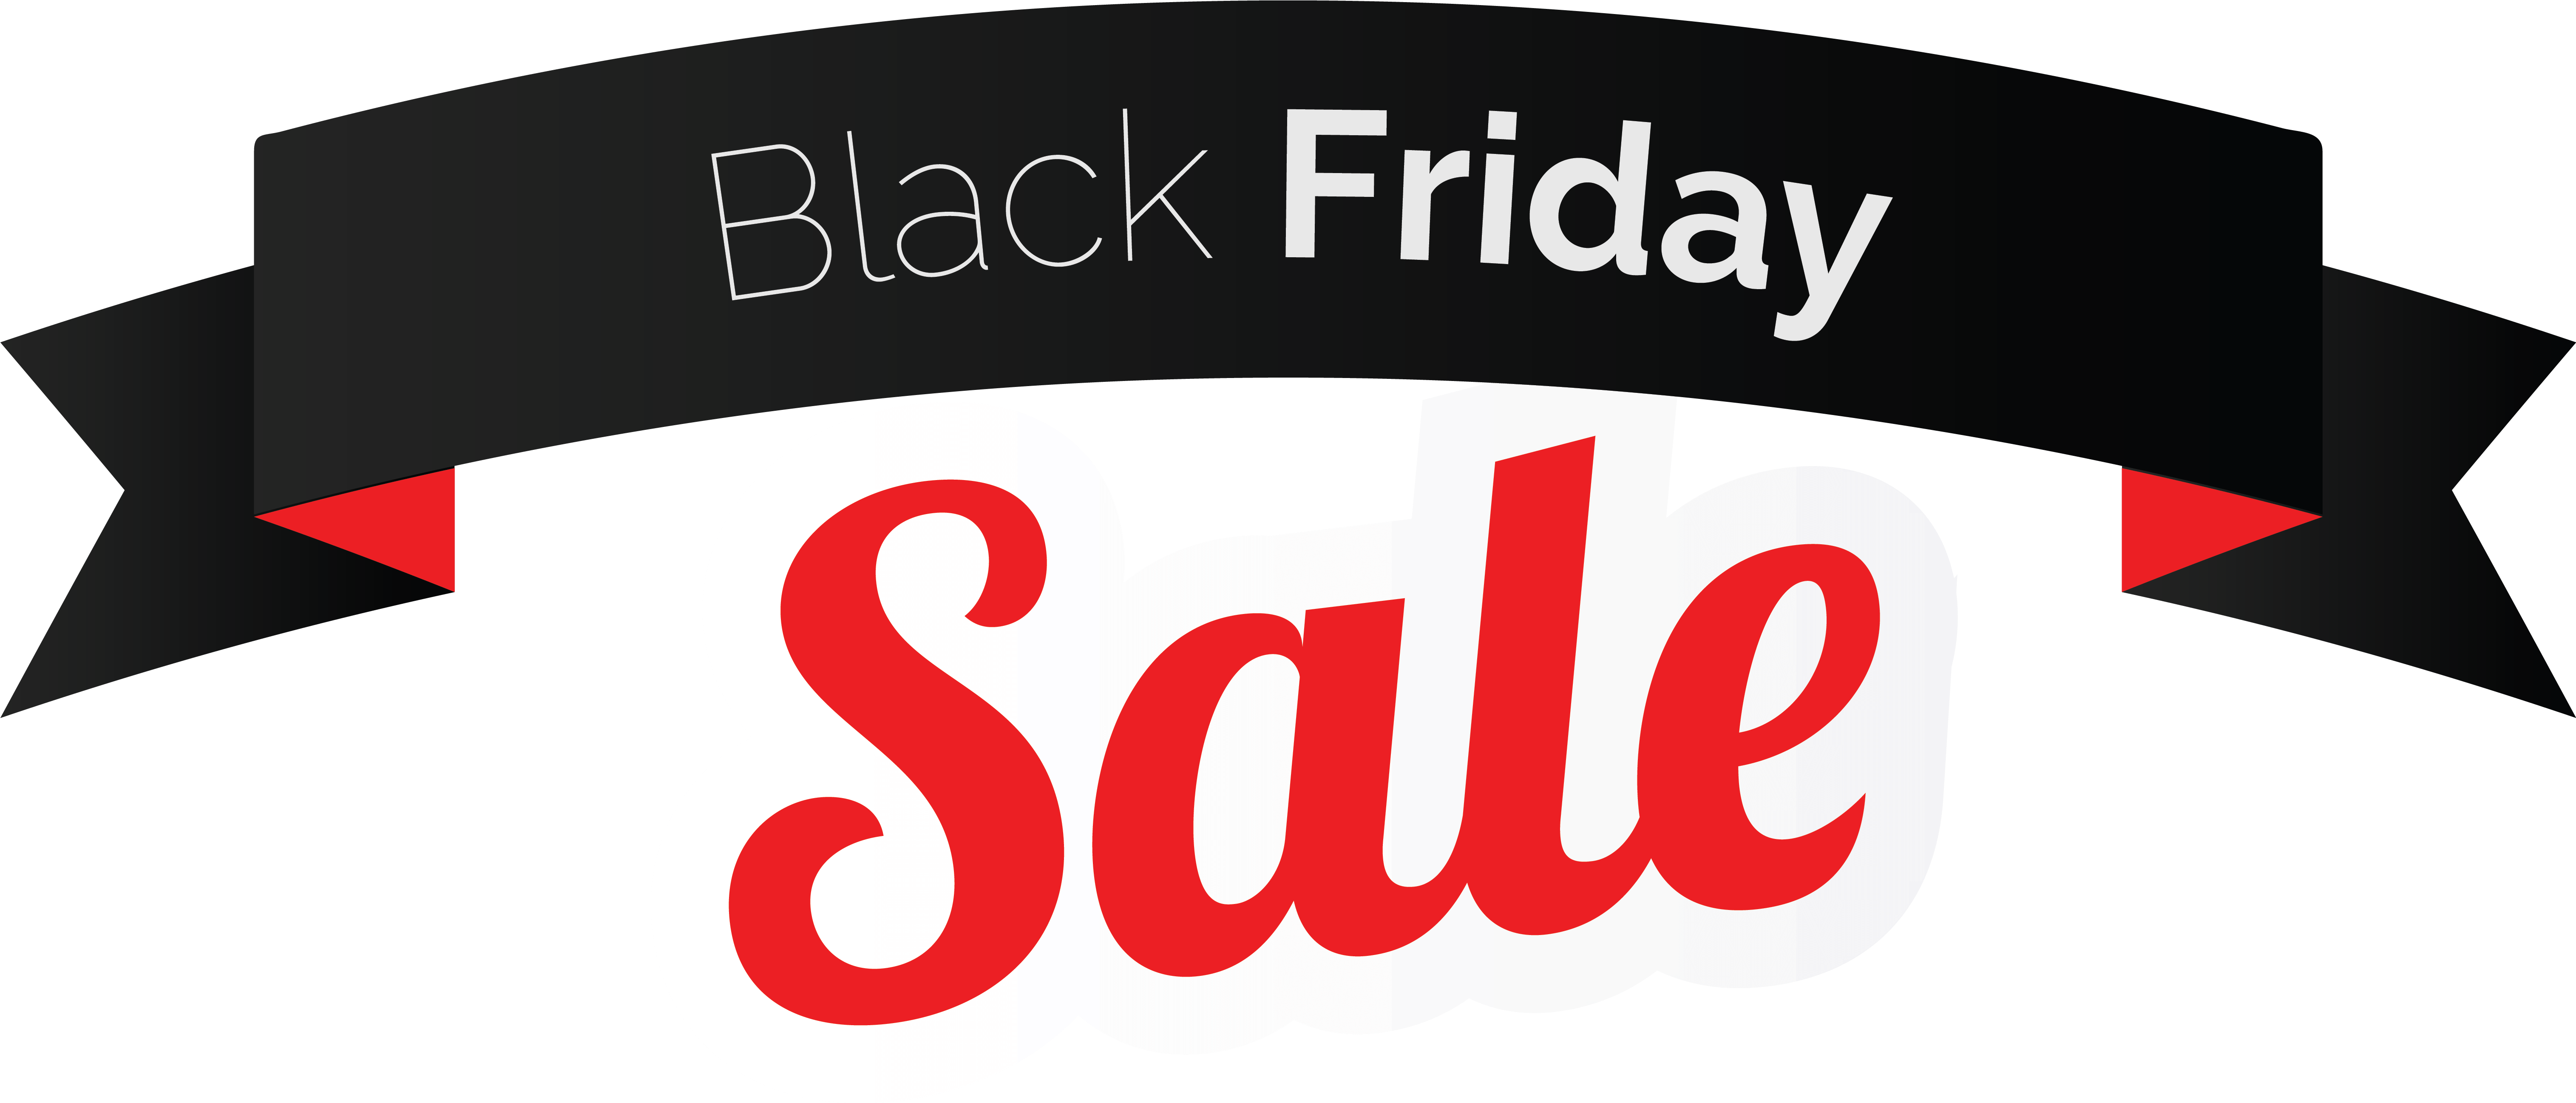 Black Friday Iphone 6, Ipad Air Deals Spill Forth From - Black Friday Sale Banner (1024x467)